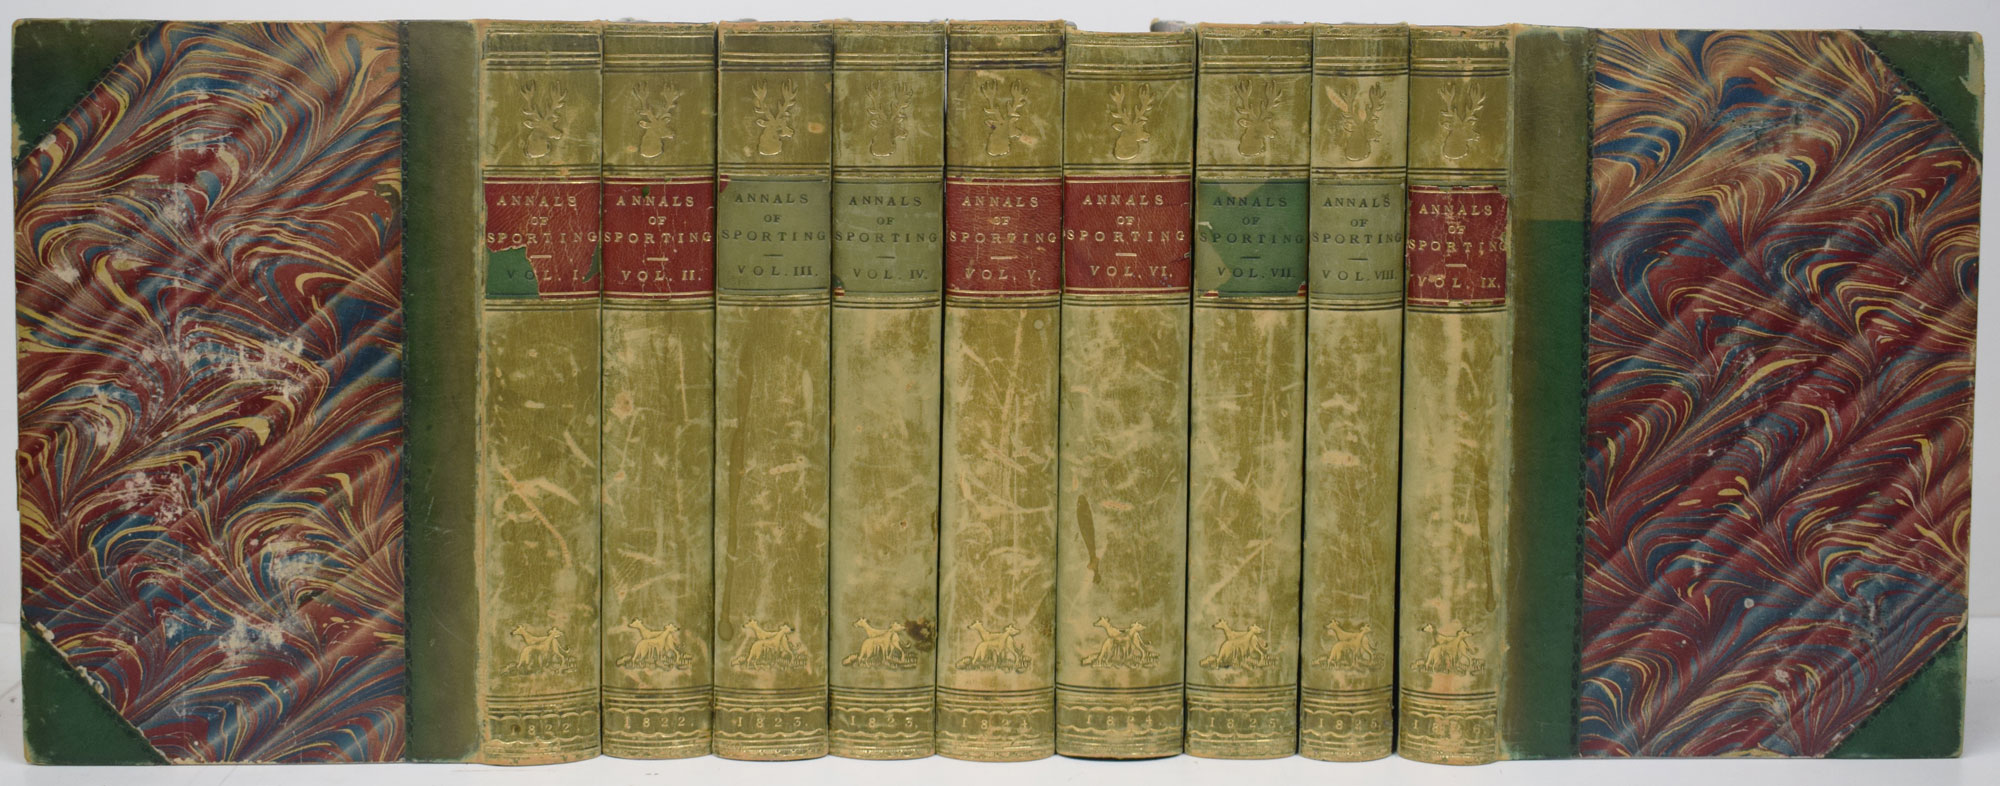 The Annals of Sporting and Fancy Gazette; A Magazine Entirely Appropriated to Sporting Subjects and Fancy Pursuits. Volumes I - IX January 1822 - June 1826. 9 volumes [of 13]